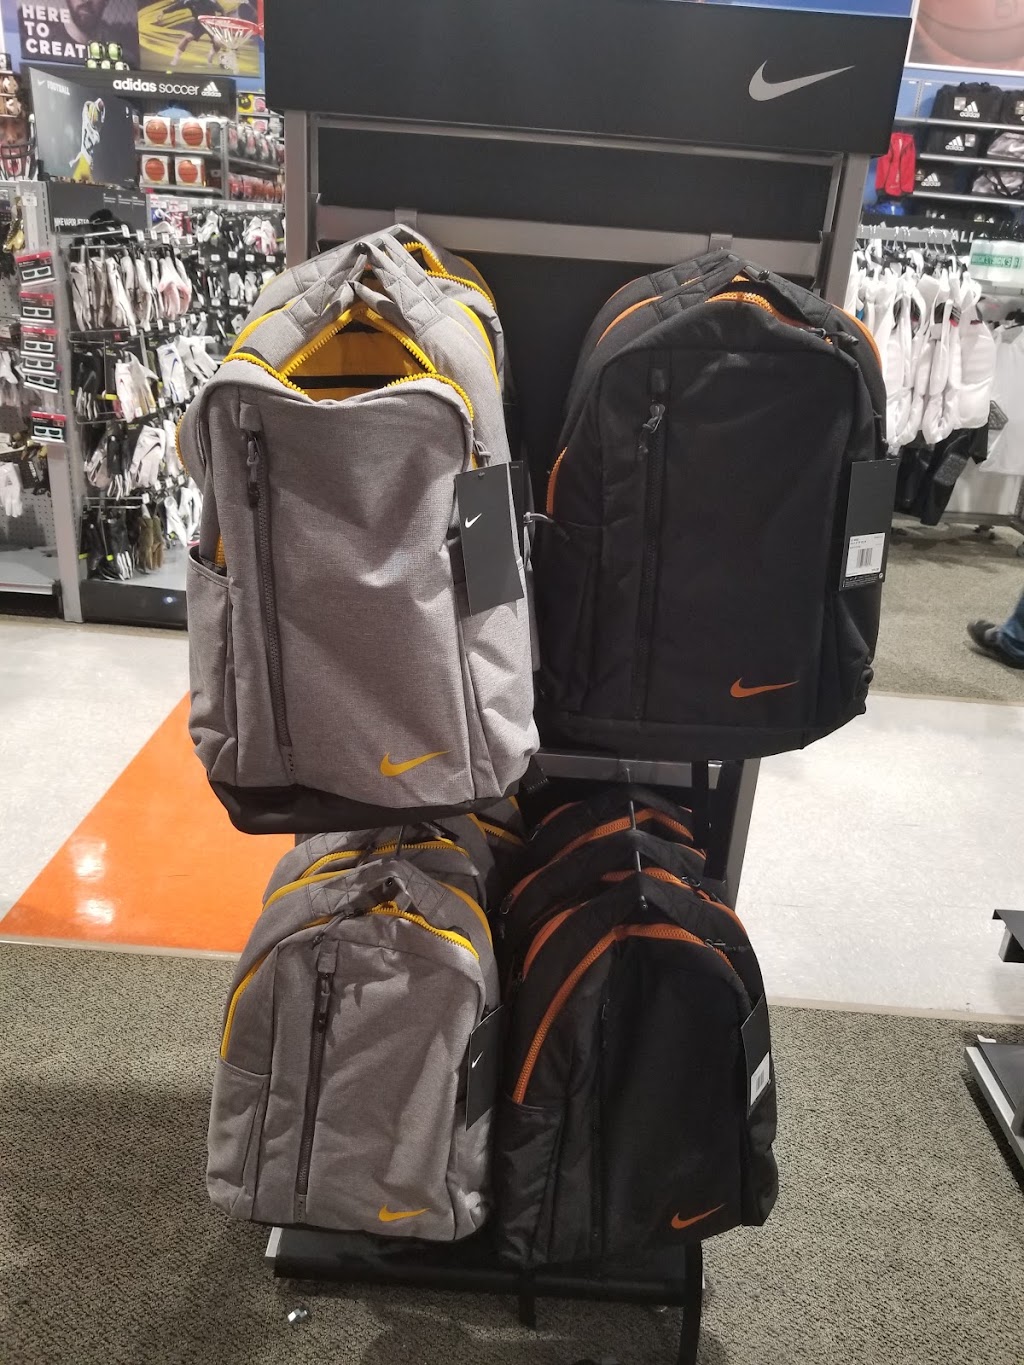 DICKS Sporting Goods | 45 Fitzgerald Street, Yonkers, NY 10710 | Phone: (914) 964-0580